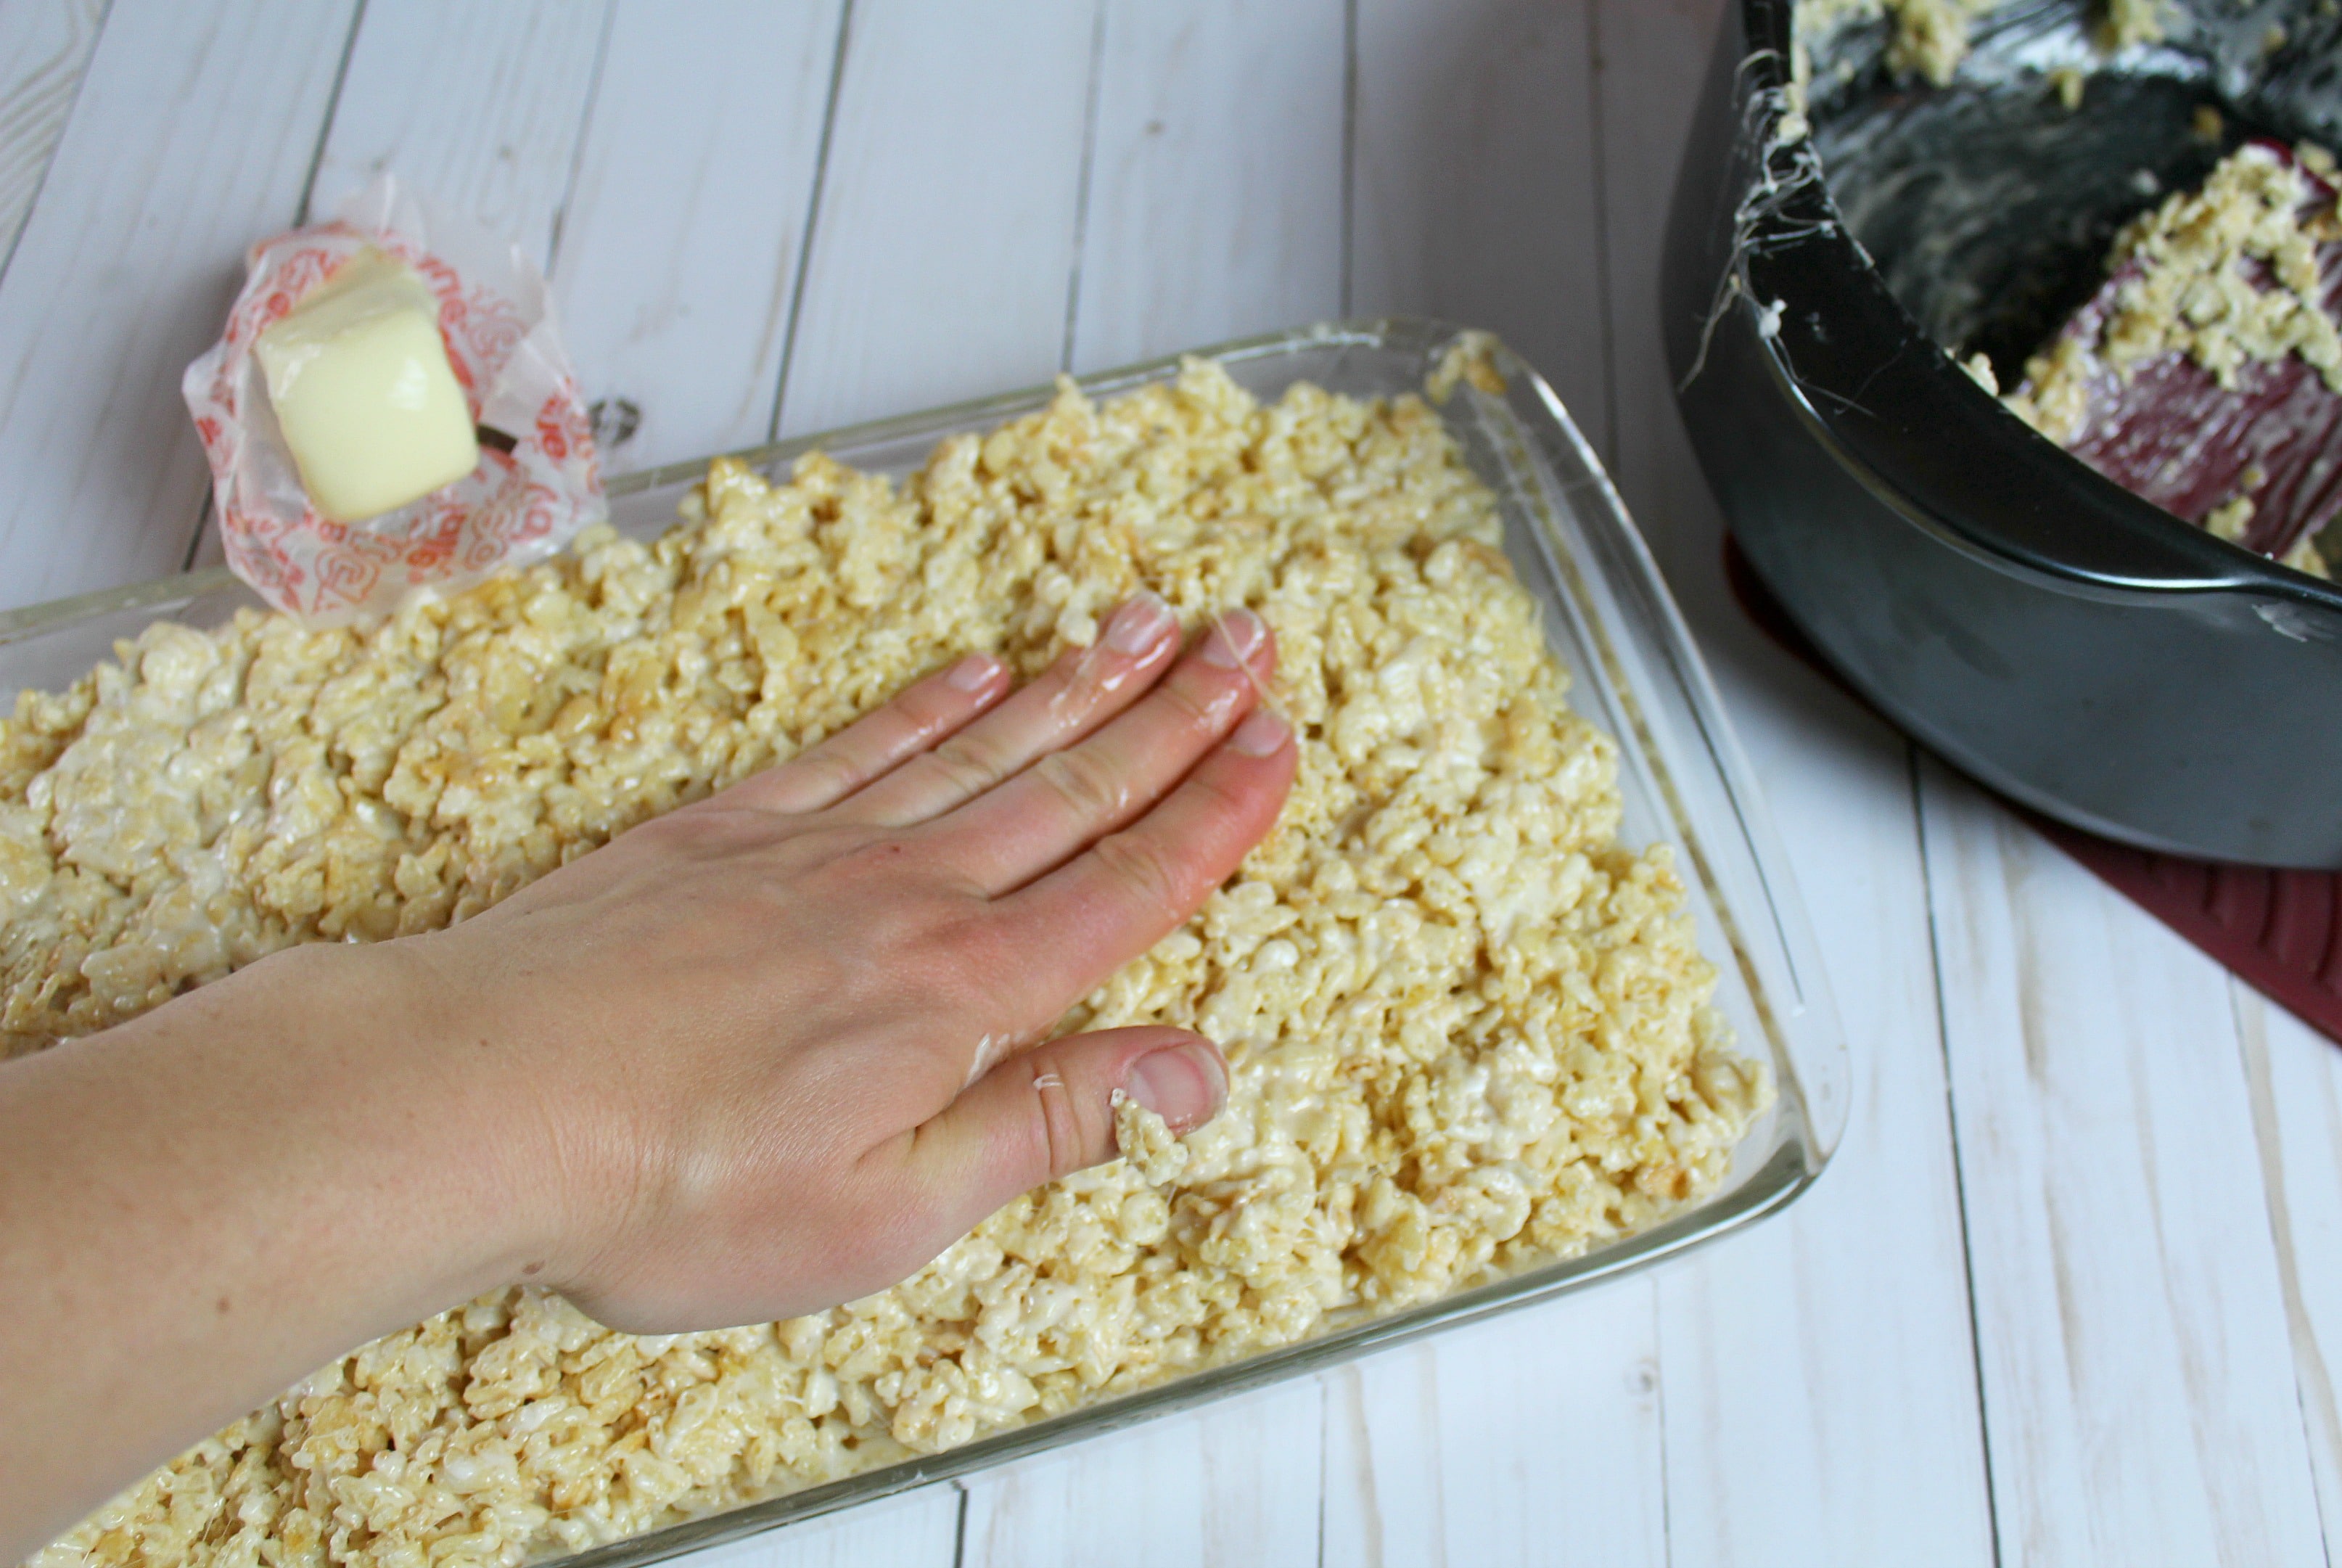 Press the rice crispy mixture into the pan with your hand. 